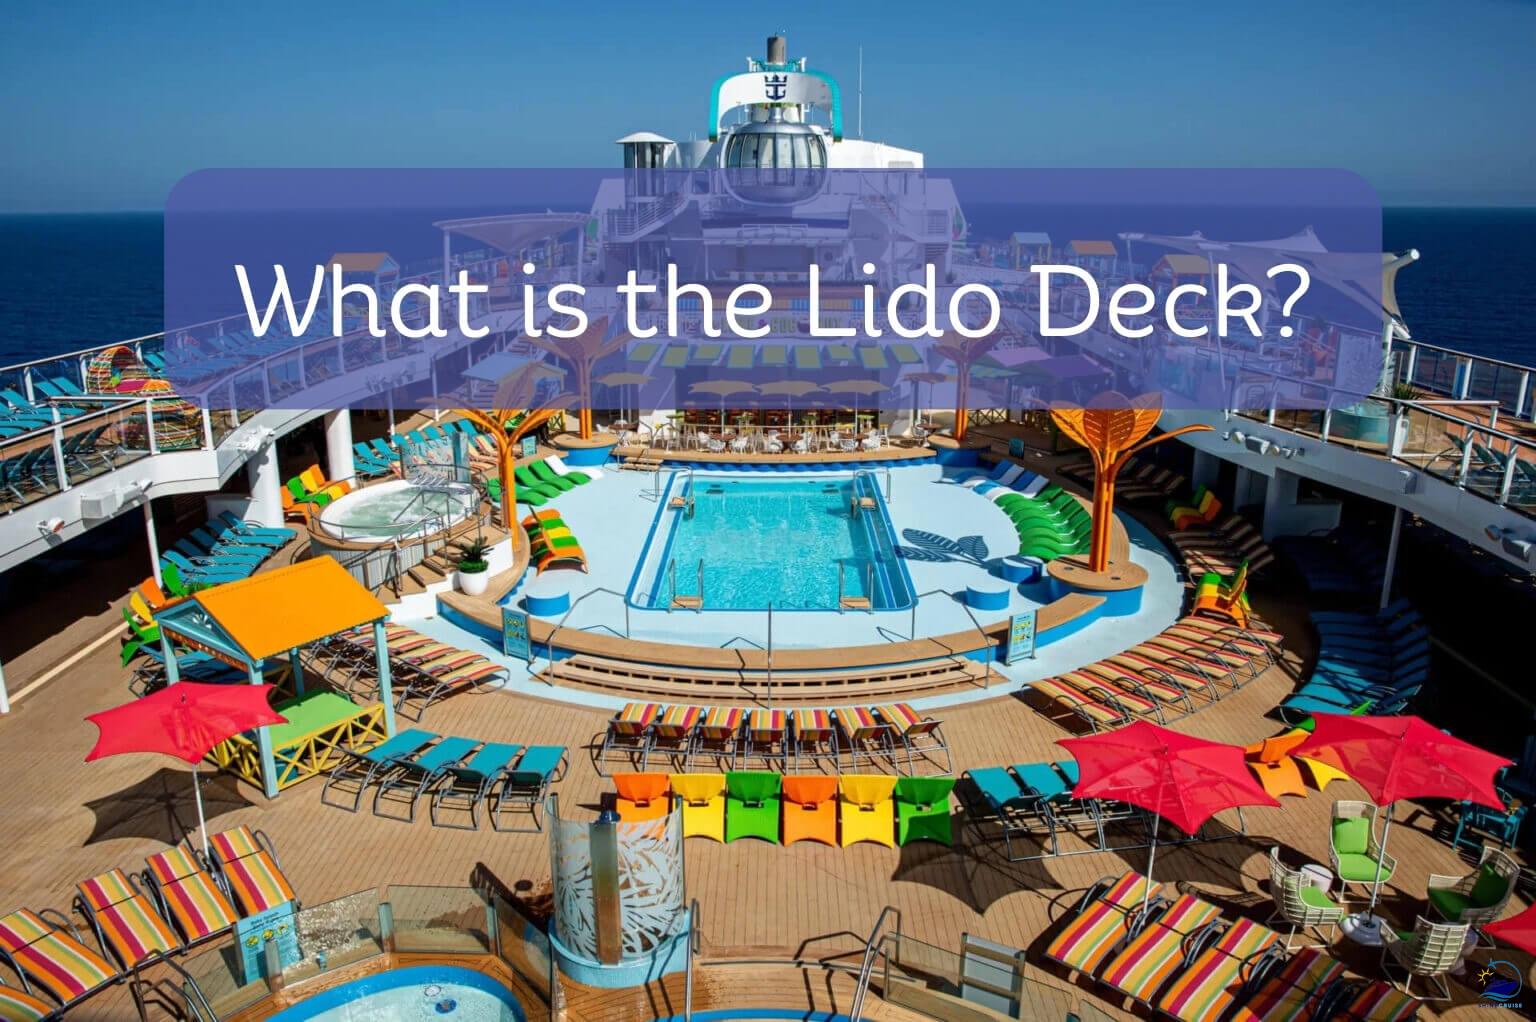 What is the lido deck